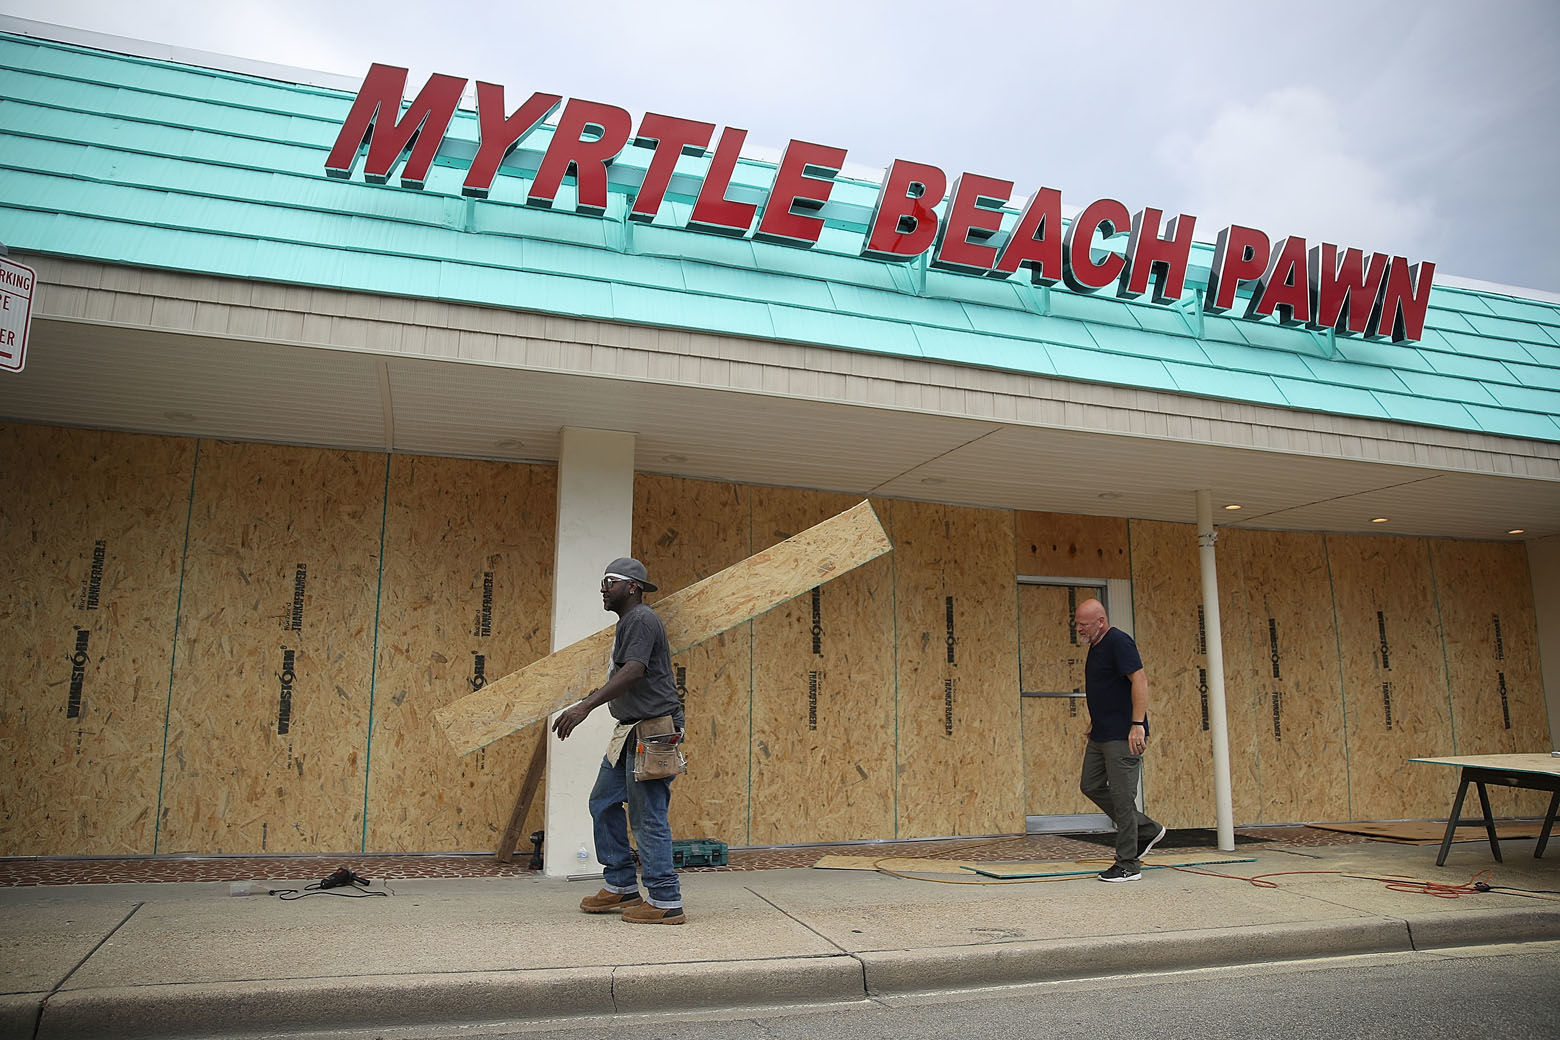 MYRTLE BEACH, SC - SEPTEMBER 11:  Jeff Bryant (L) and James Evans board the windows of a business ahead of the arrival of Hurricane Florence on September 11, 2018 in Myrtle Beach, South Carolina. Florence is expected to make landfall by late Thursday to near Category 5 strength along the Virginia, North Carolina and South Carolina coastline.  (Photo by Joe Raedle/Getty Images)